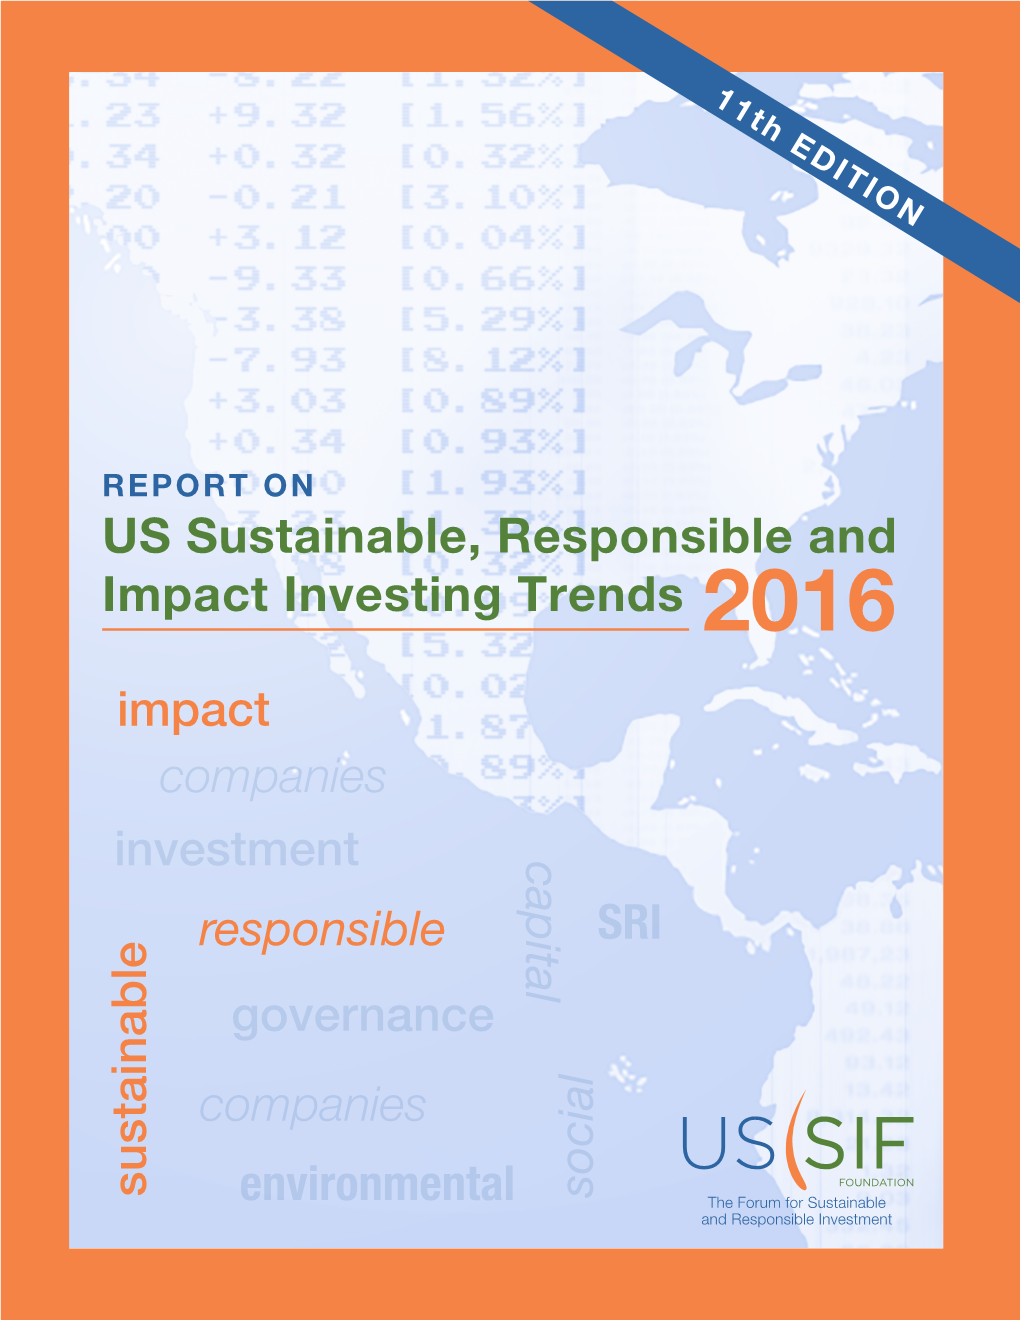 SRI Capital Sustainable Investment Impact Governance Companies